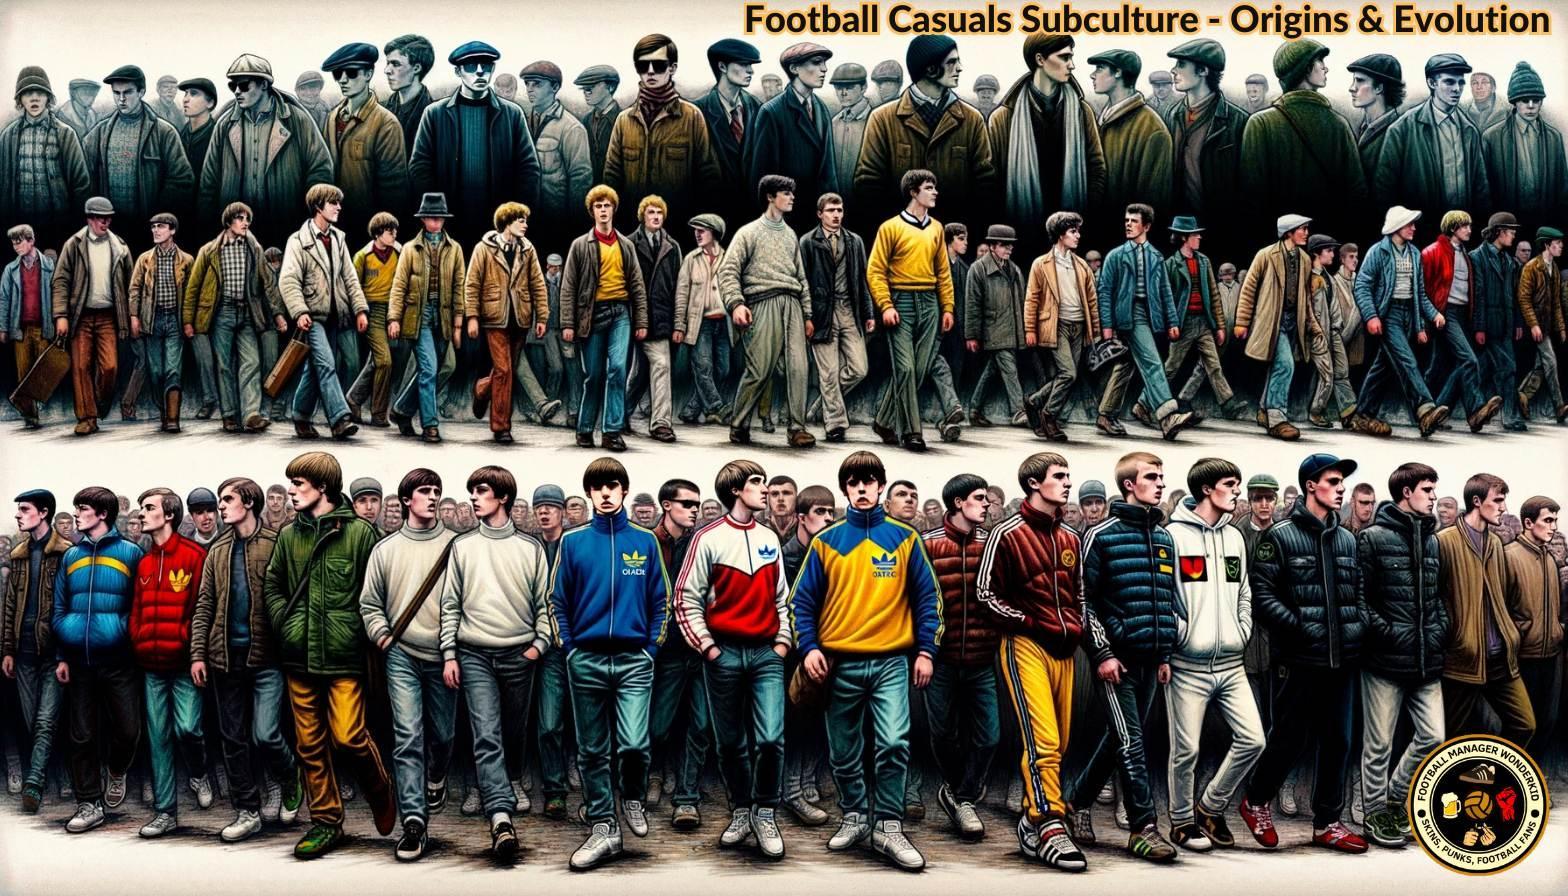 Brief History of Football Casuals Subculture